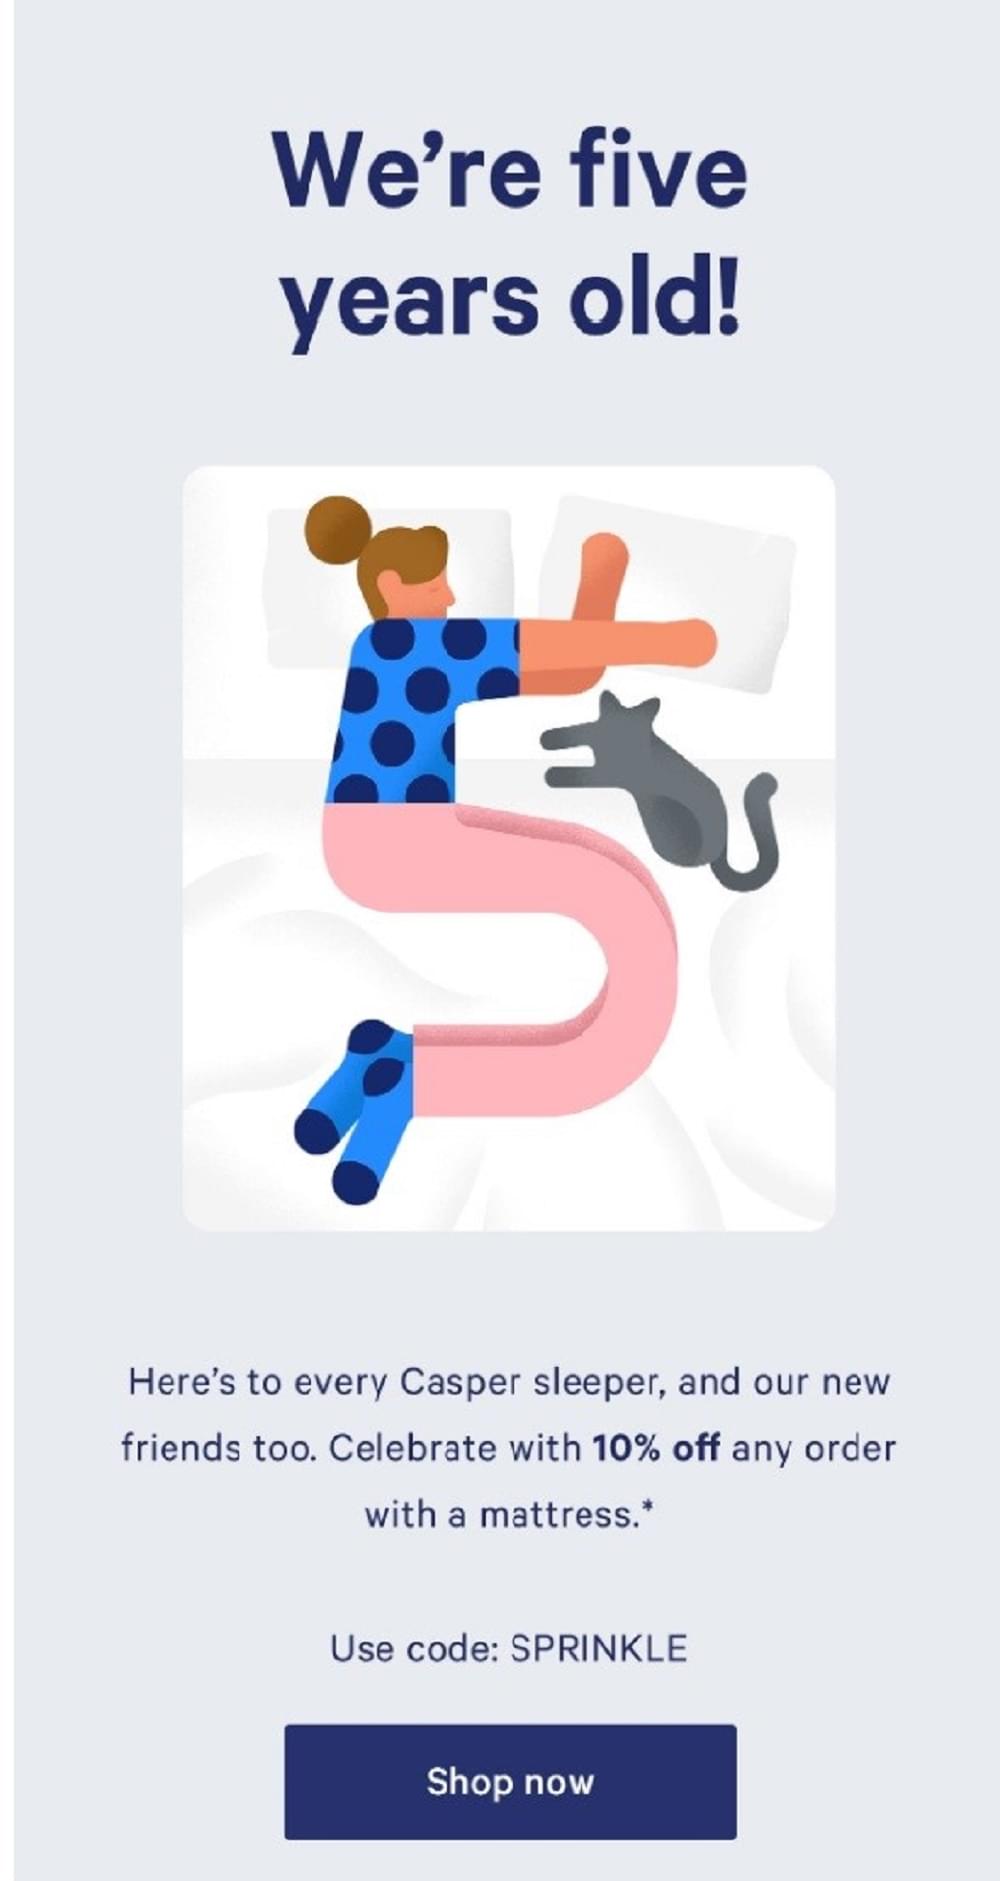 Corporate anniversary email by Casper: we're five years old